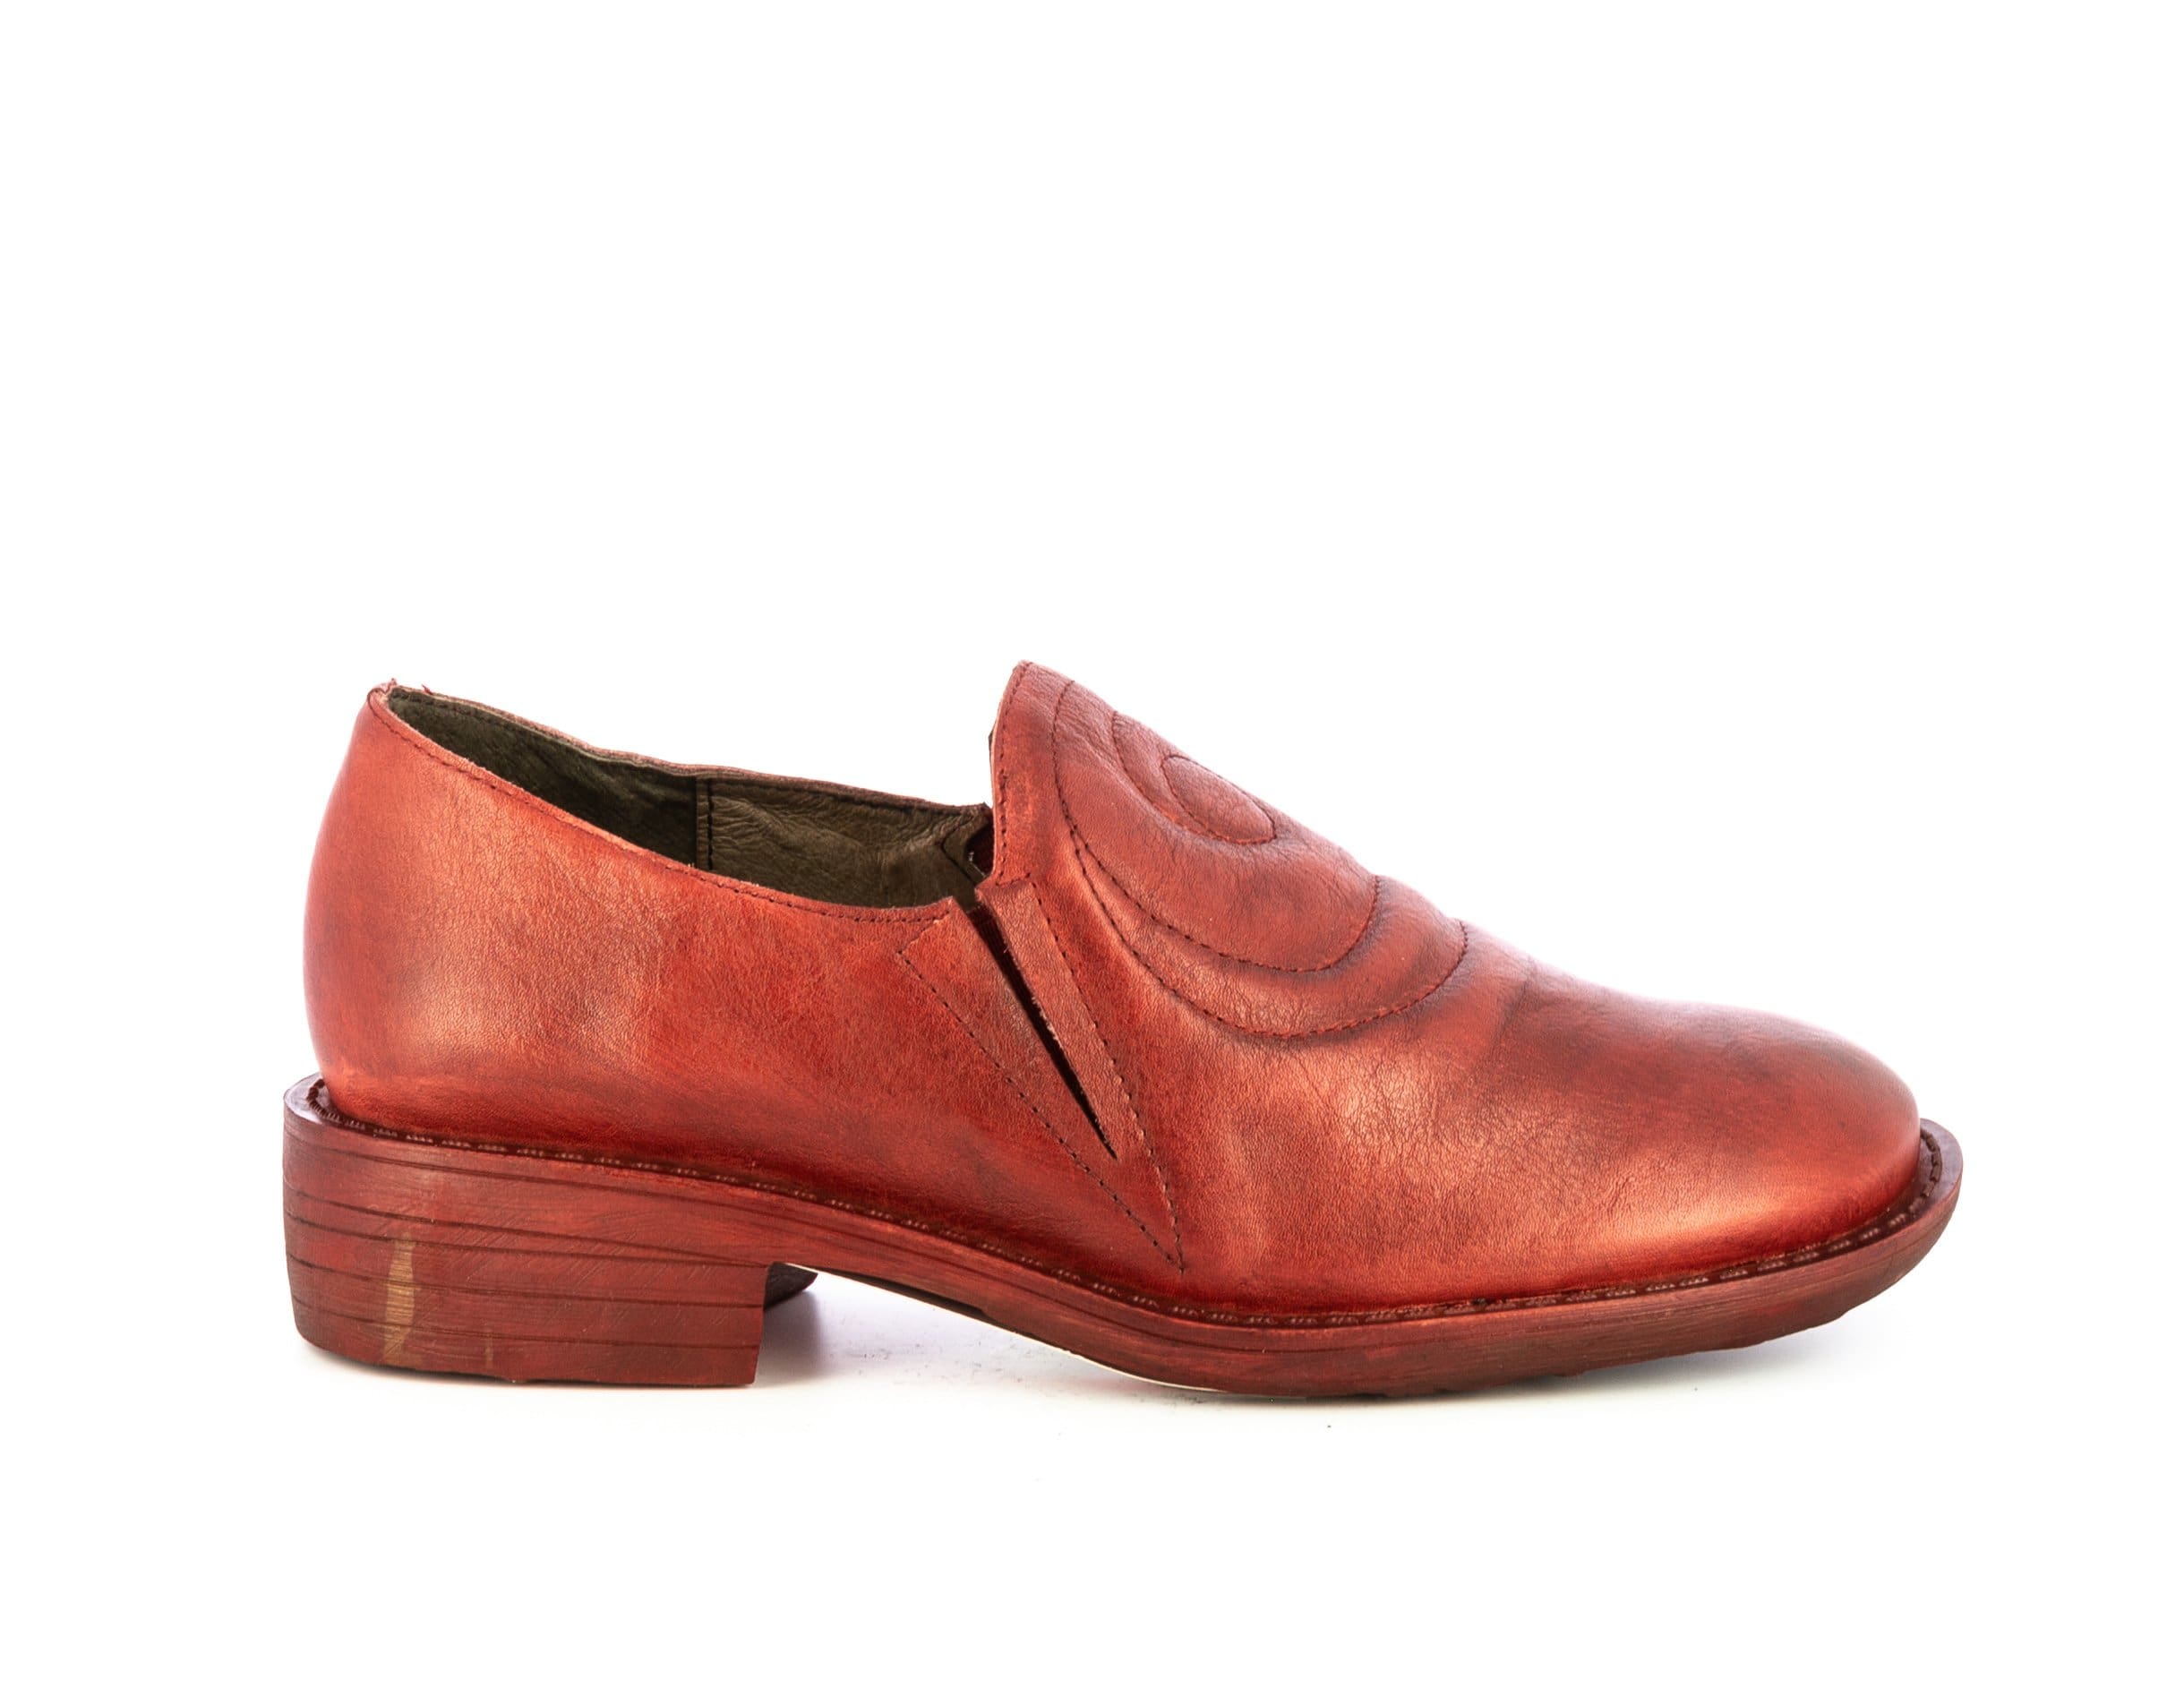 Chaussure IDCALIAO 02 - 35 / Rouge - Mocassin